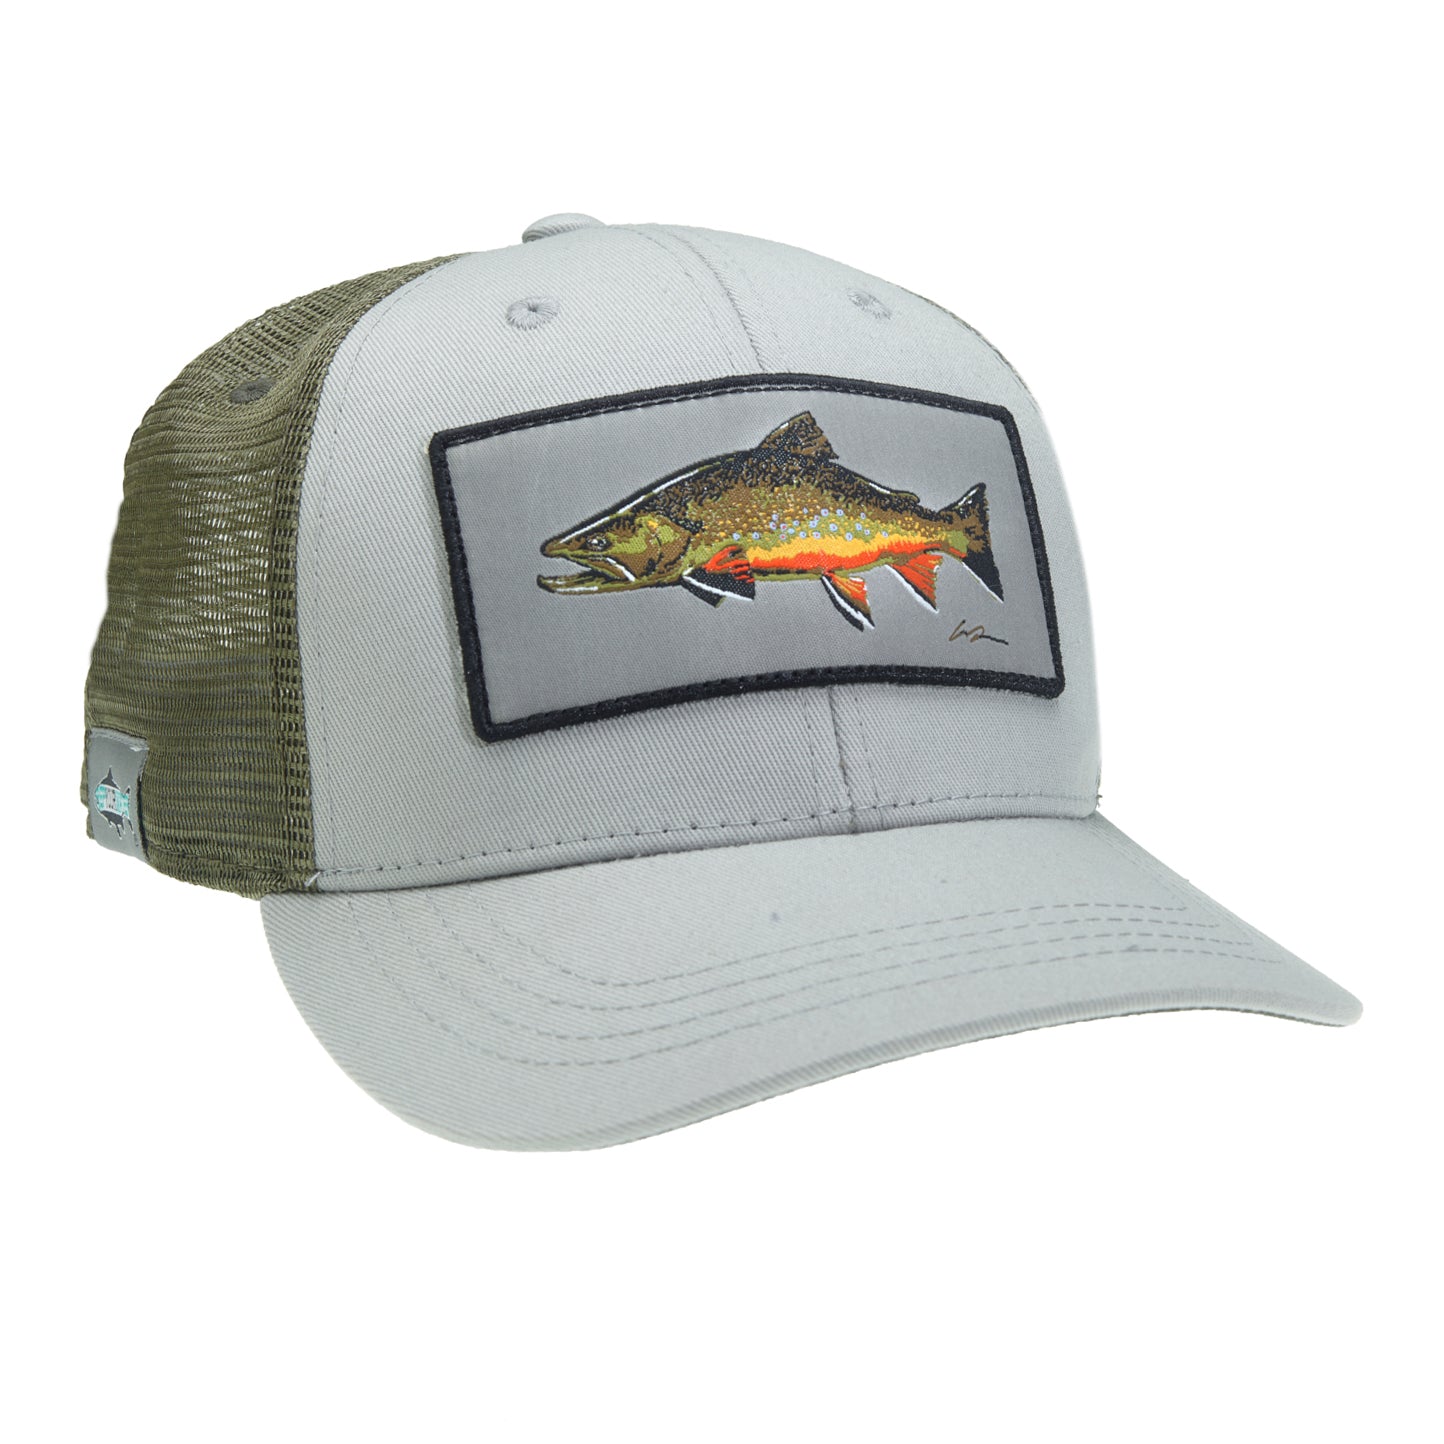 A hat with green mesh in back and light gray fabric in front has a rectangular patch with a large brook trout on it